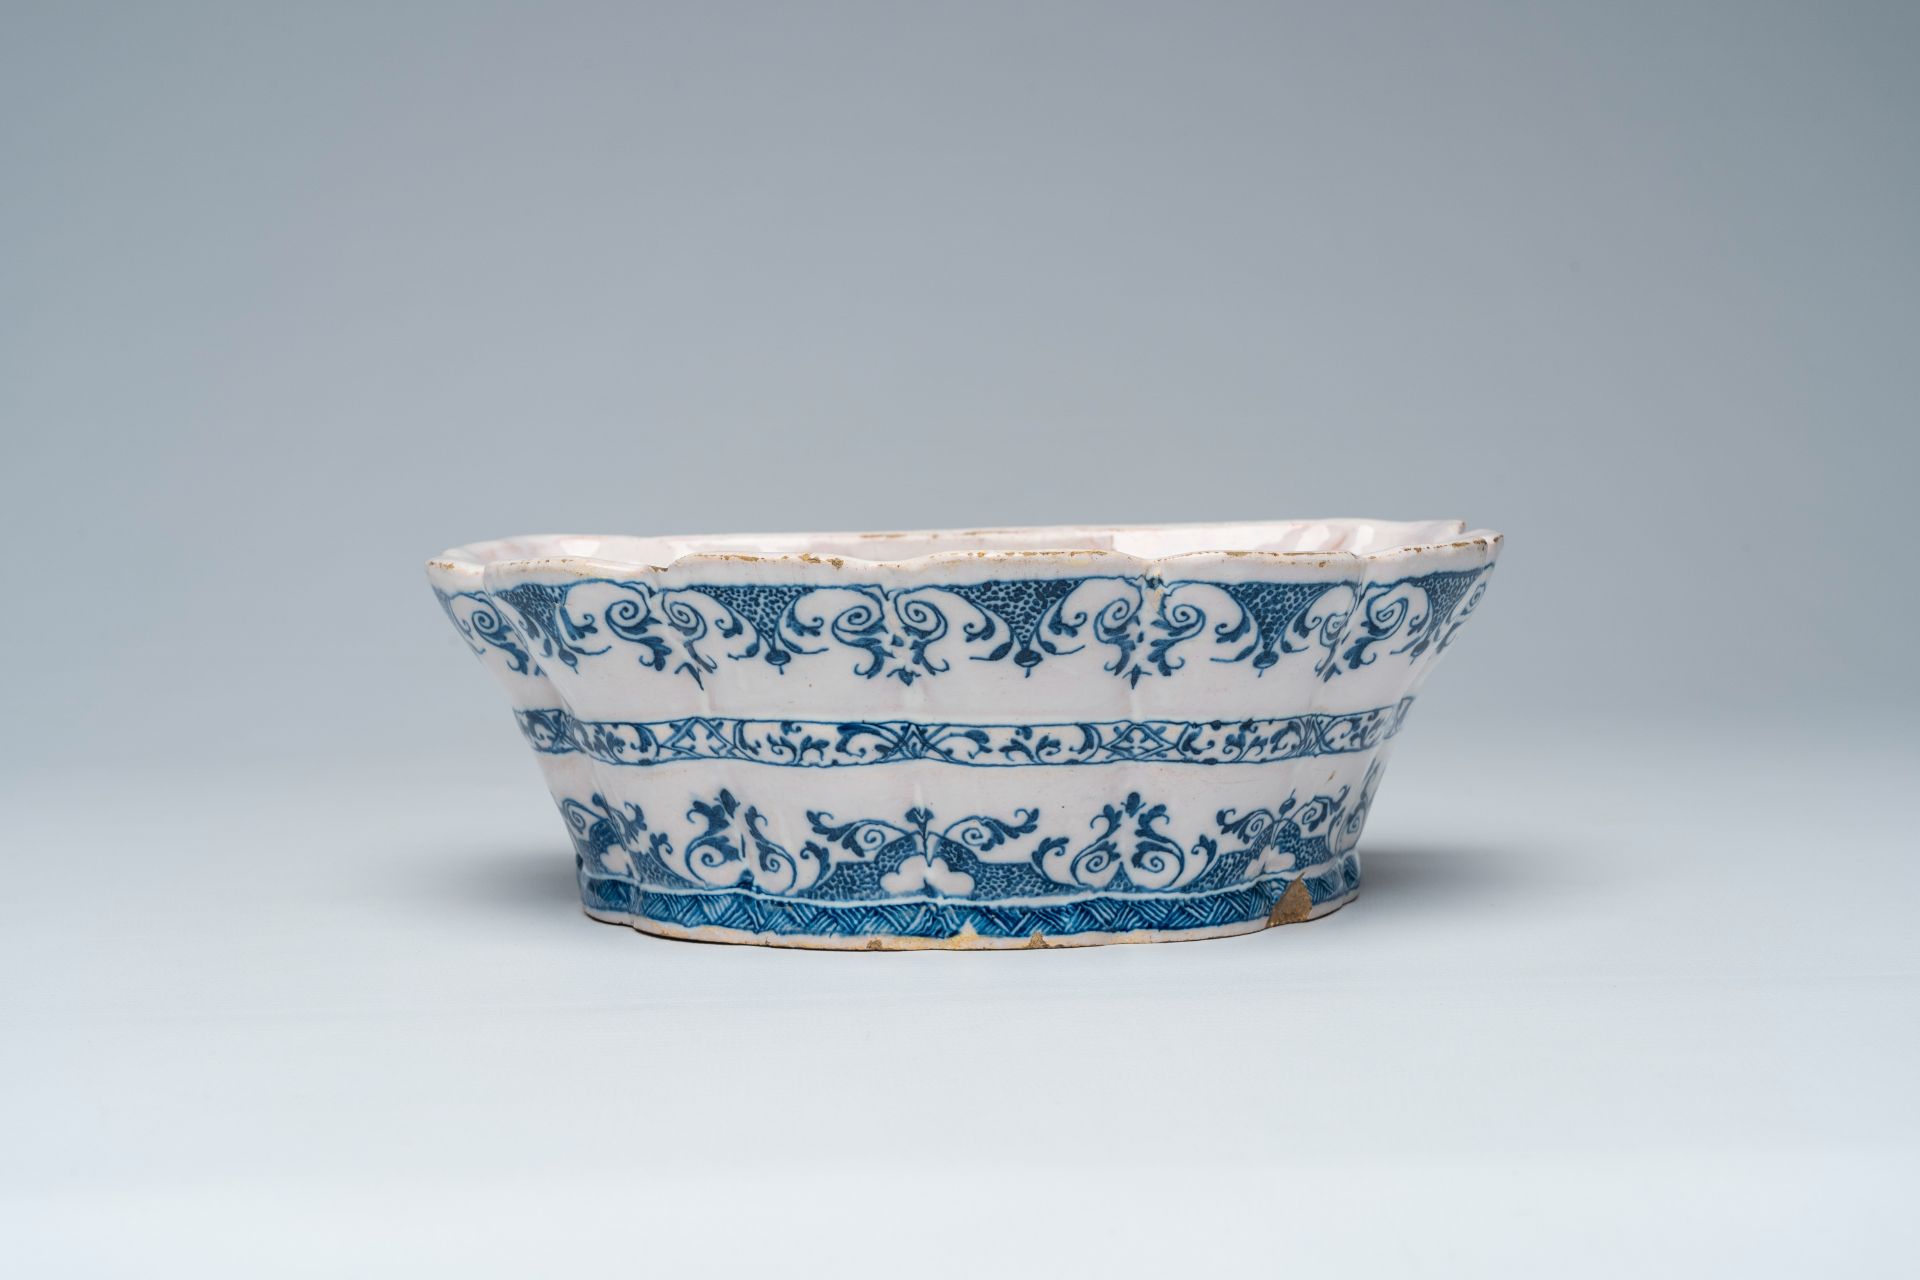 A blue and white Moustiers faience flower holder, France, 18th C. - Image 2 of 7